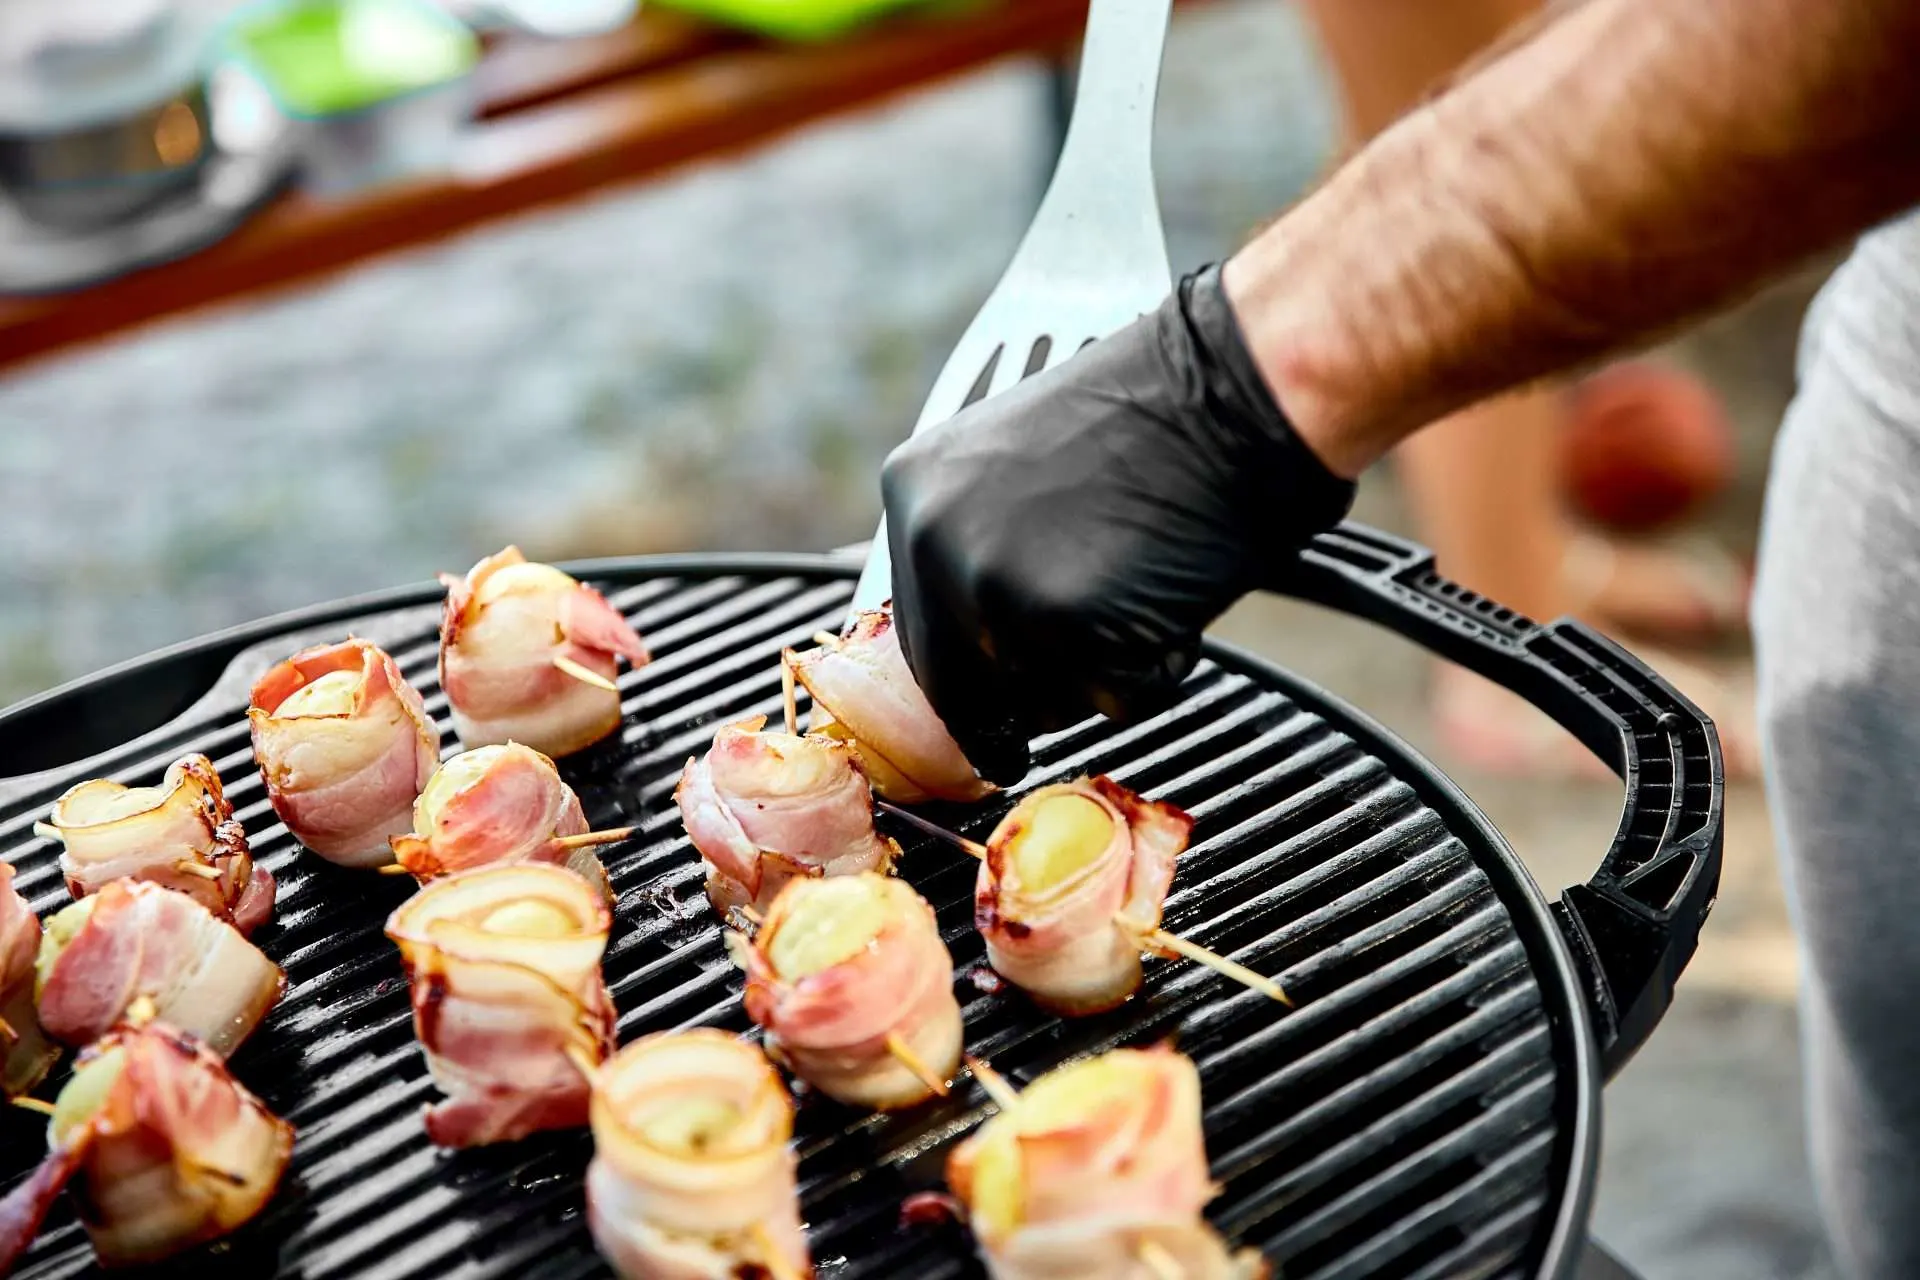 Bacon wrapped potatoes being made on grill